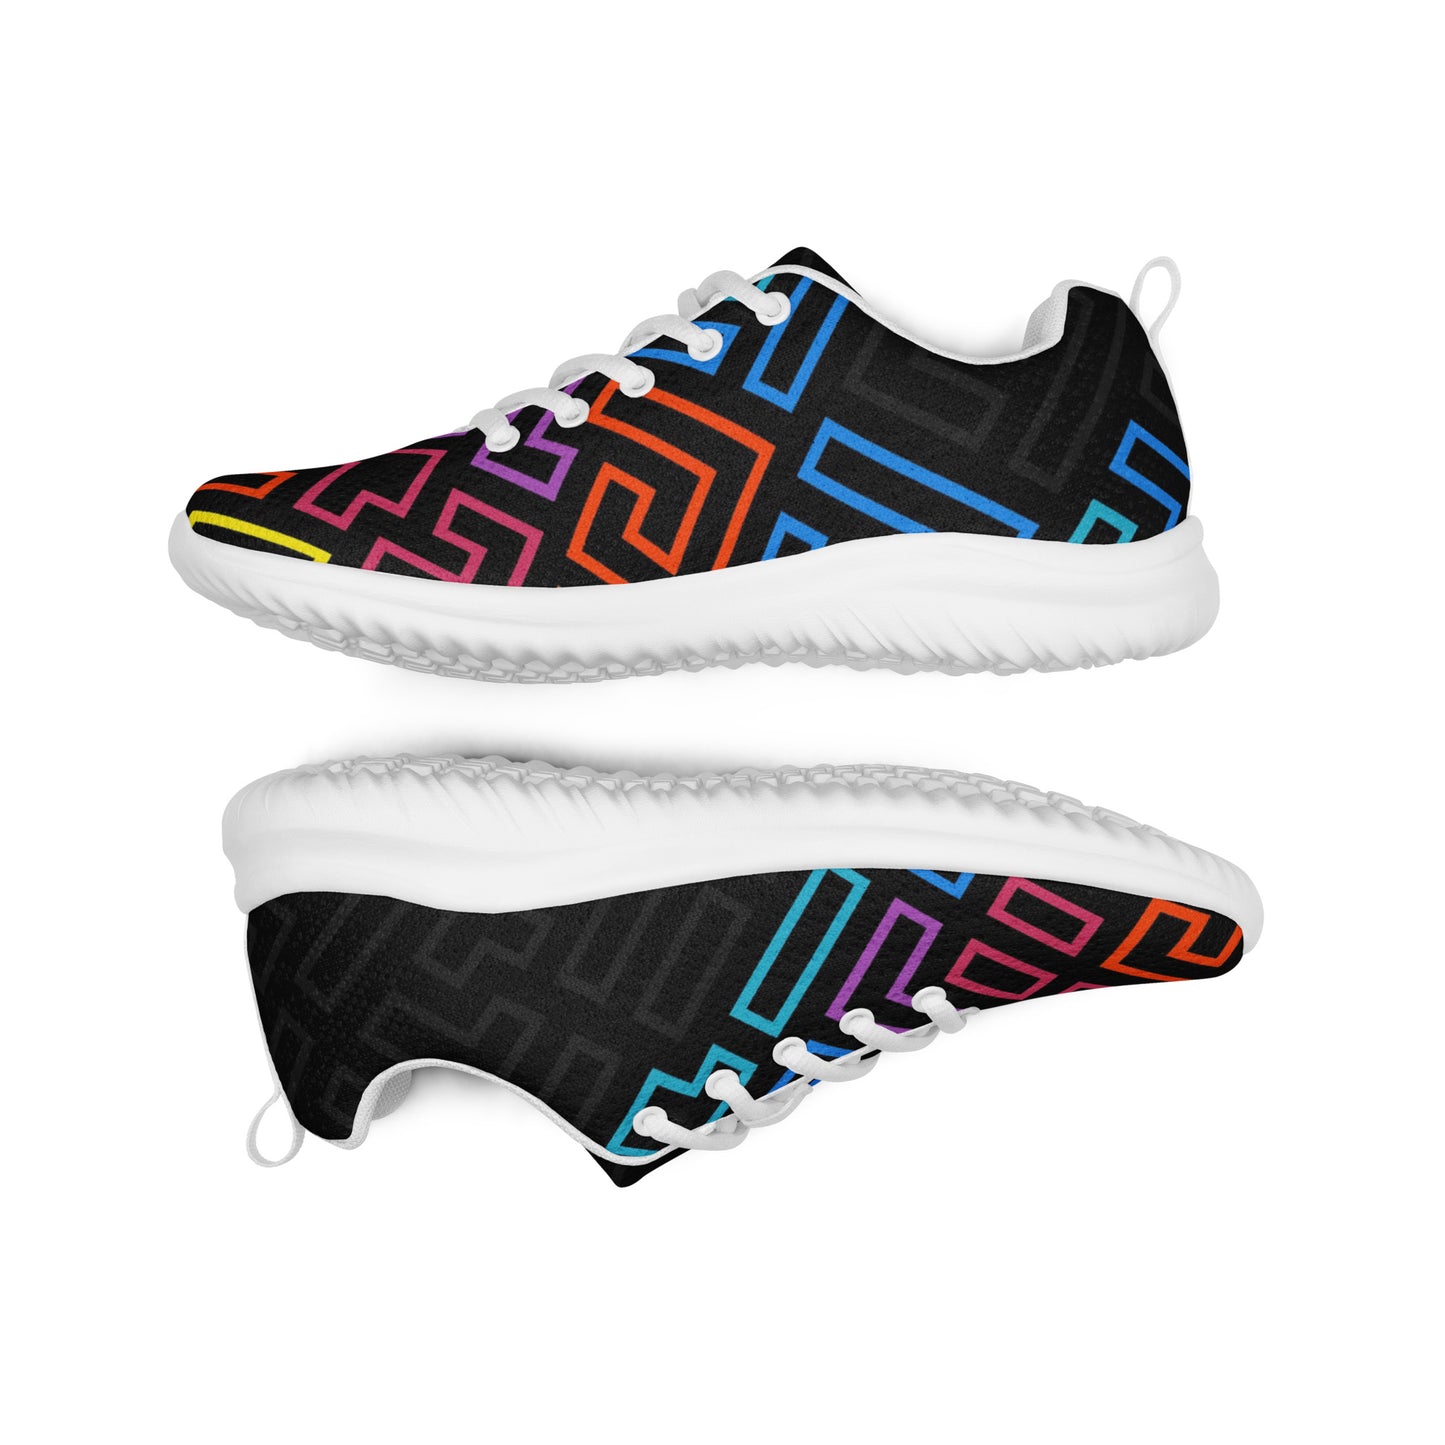 A Maze Me Men's Athletic Shoes, Ultra Lightweight Breathable Walking Shoes, Casual Sports Shoes